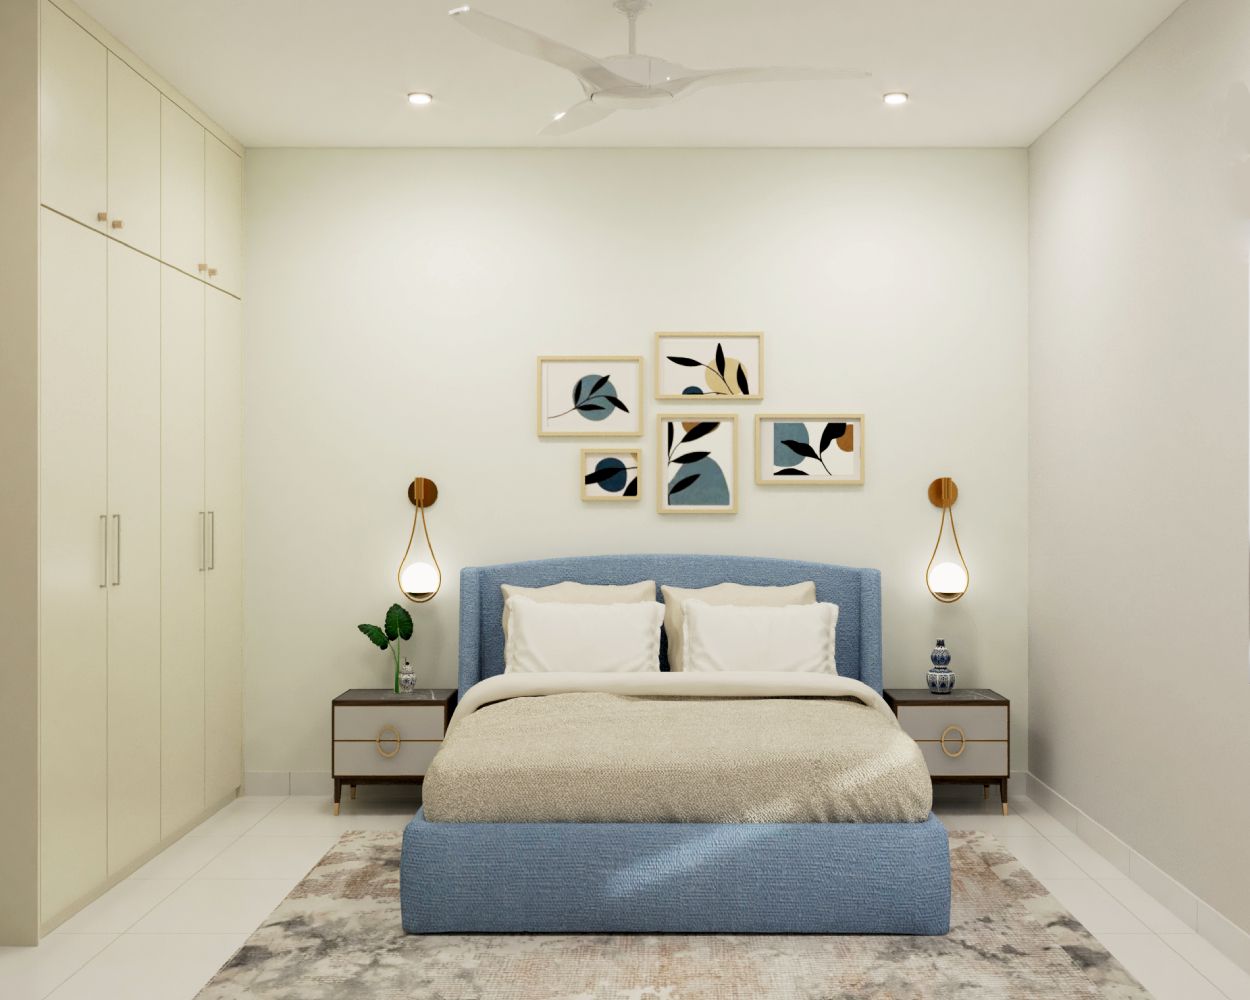 Modern Cream-Toned Guest Room Design With Blue Bed